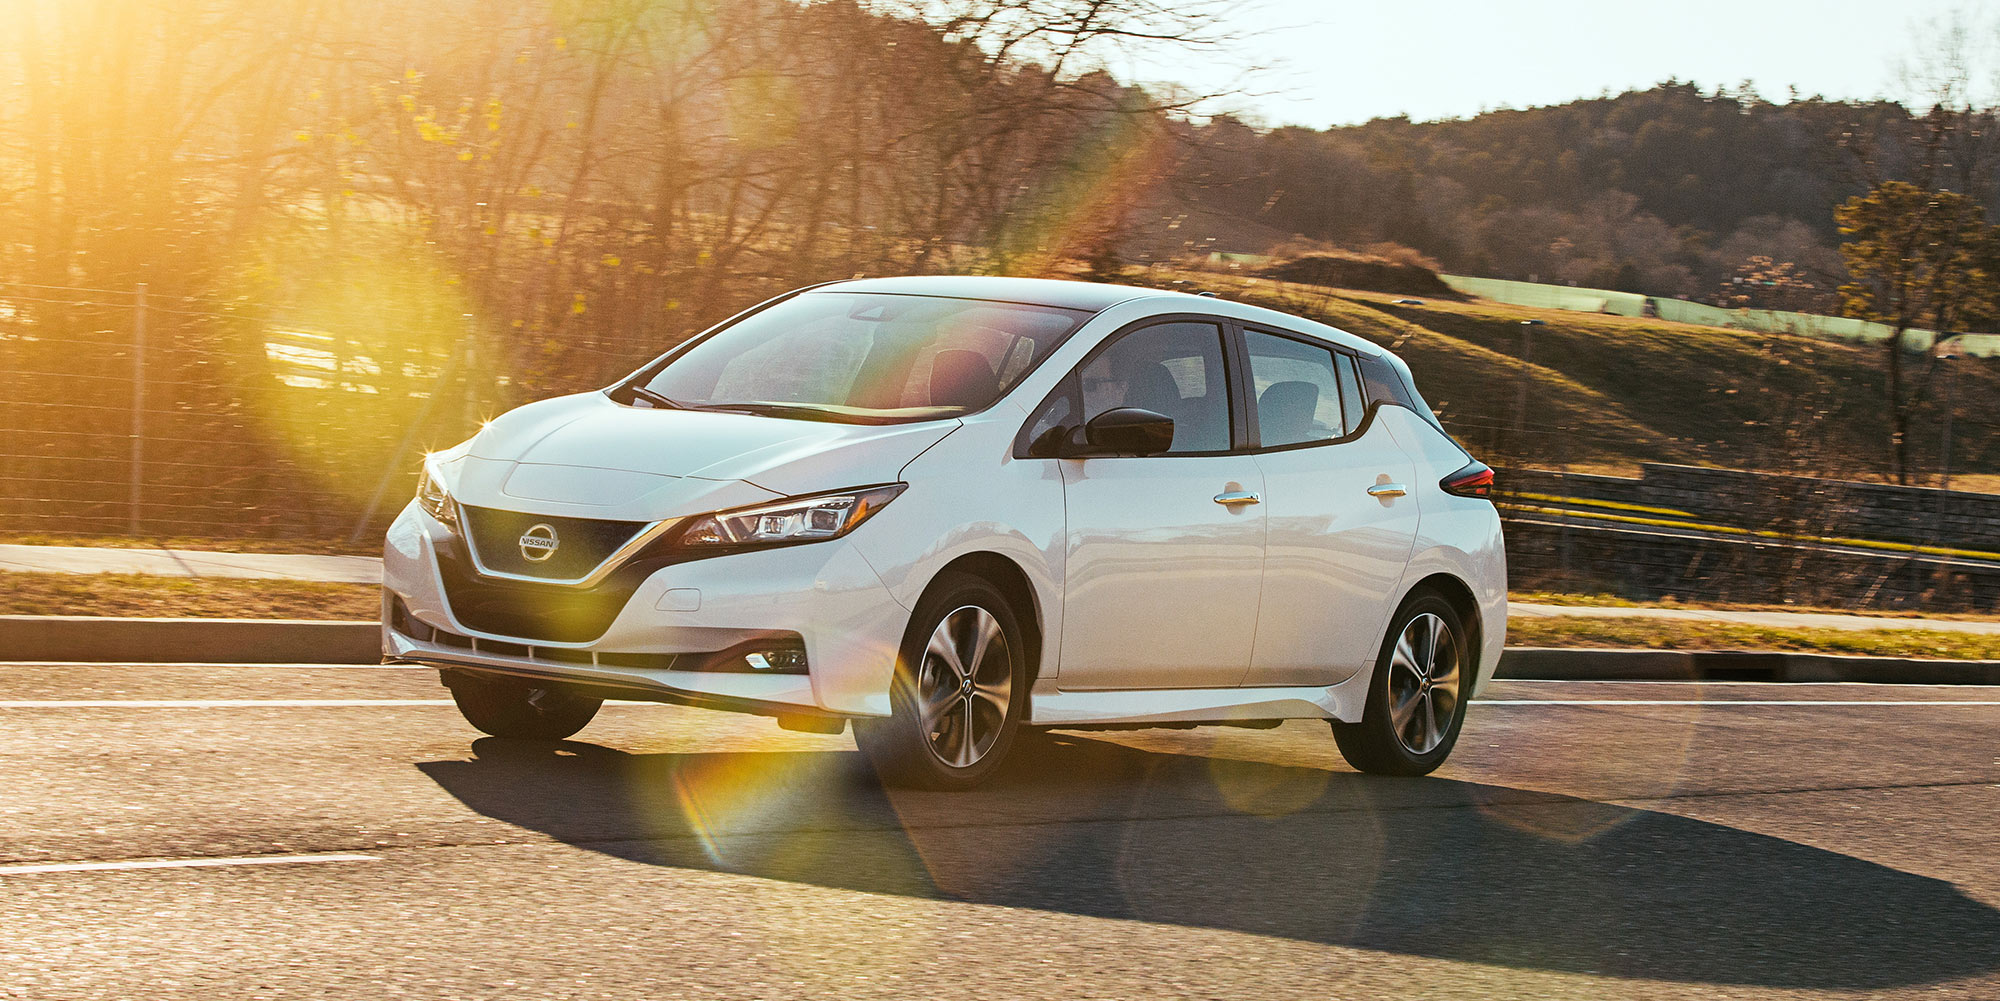 The Leaf has been Nissan's sole EV in the US for a decade.